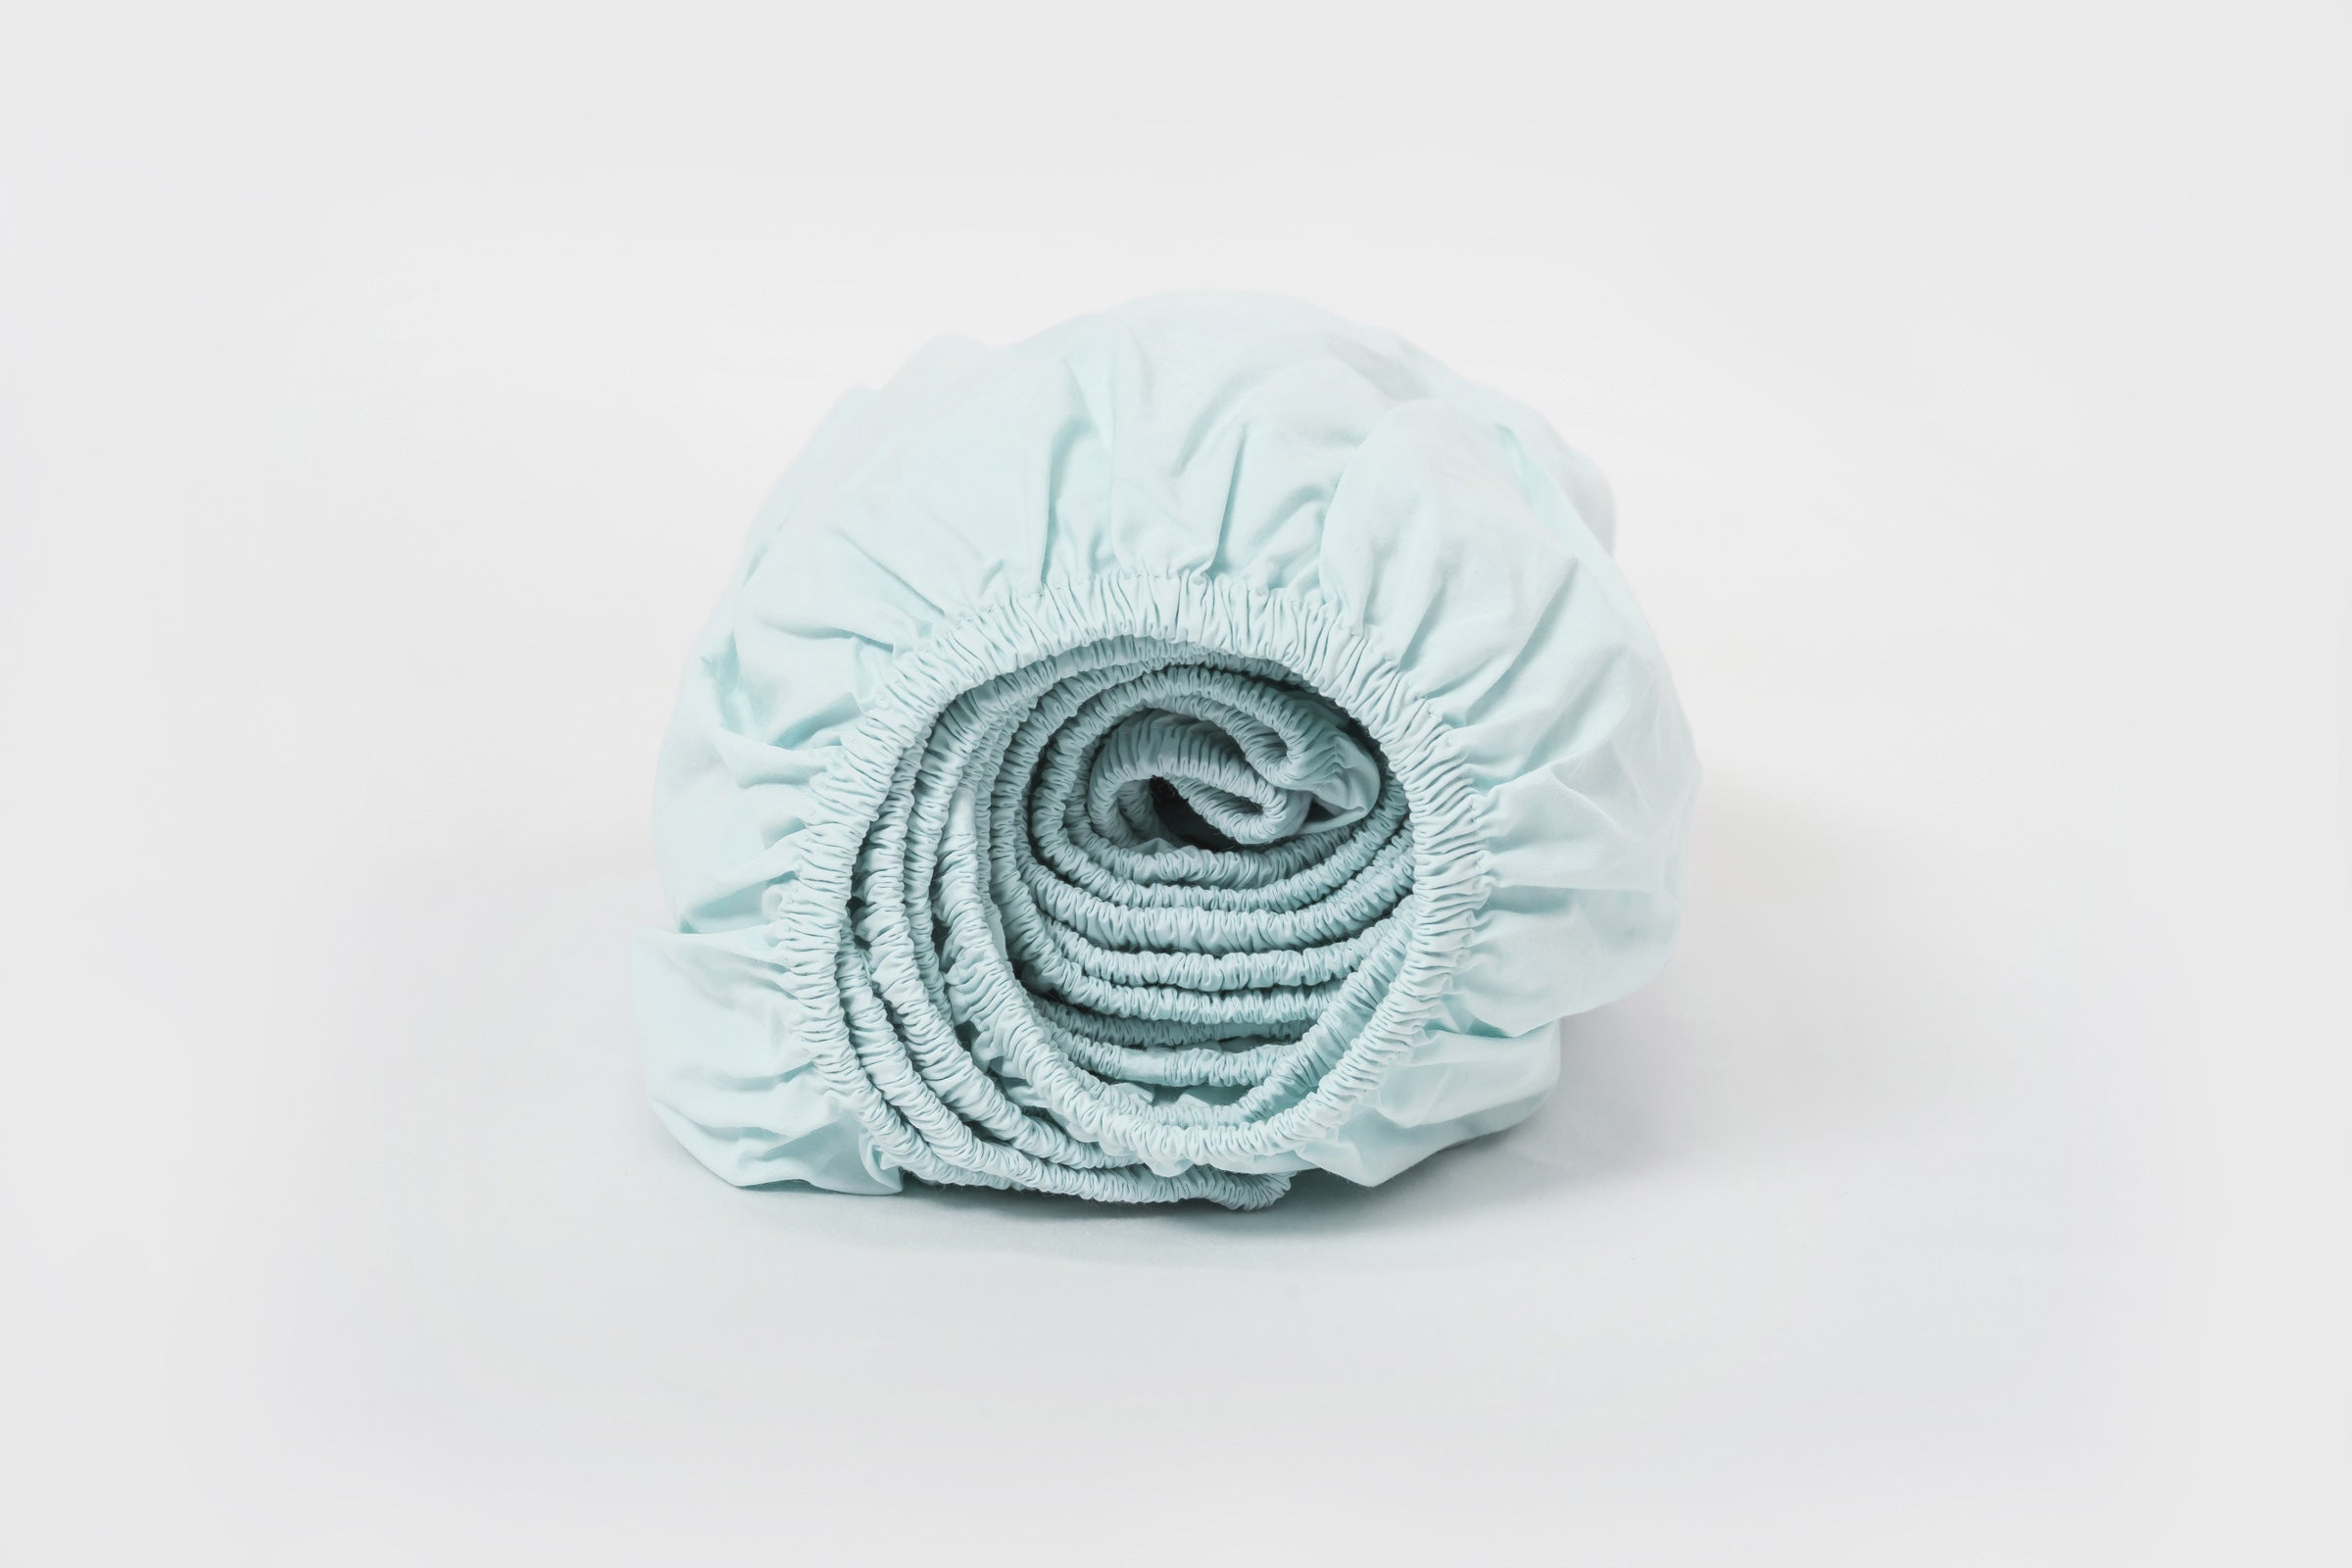 classic-mint-fitted-sheet-product-shot-by-sojao.jpg